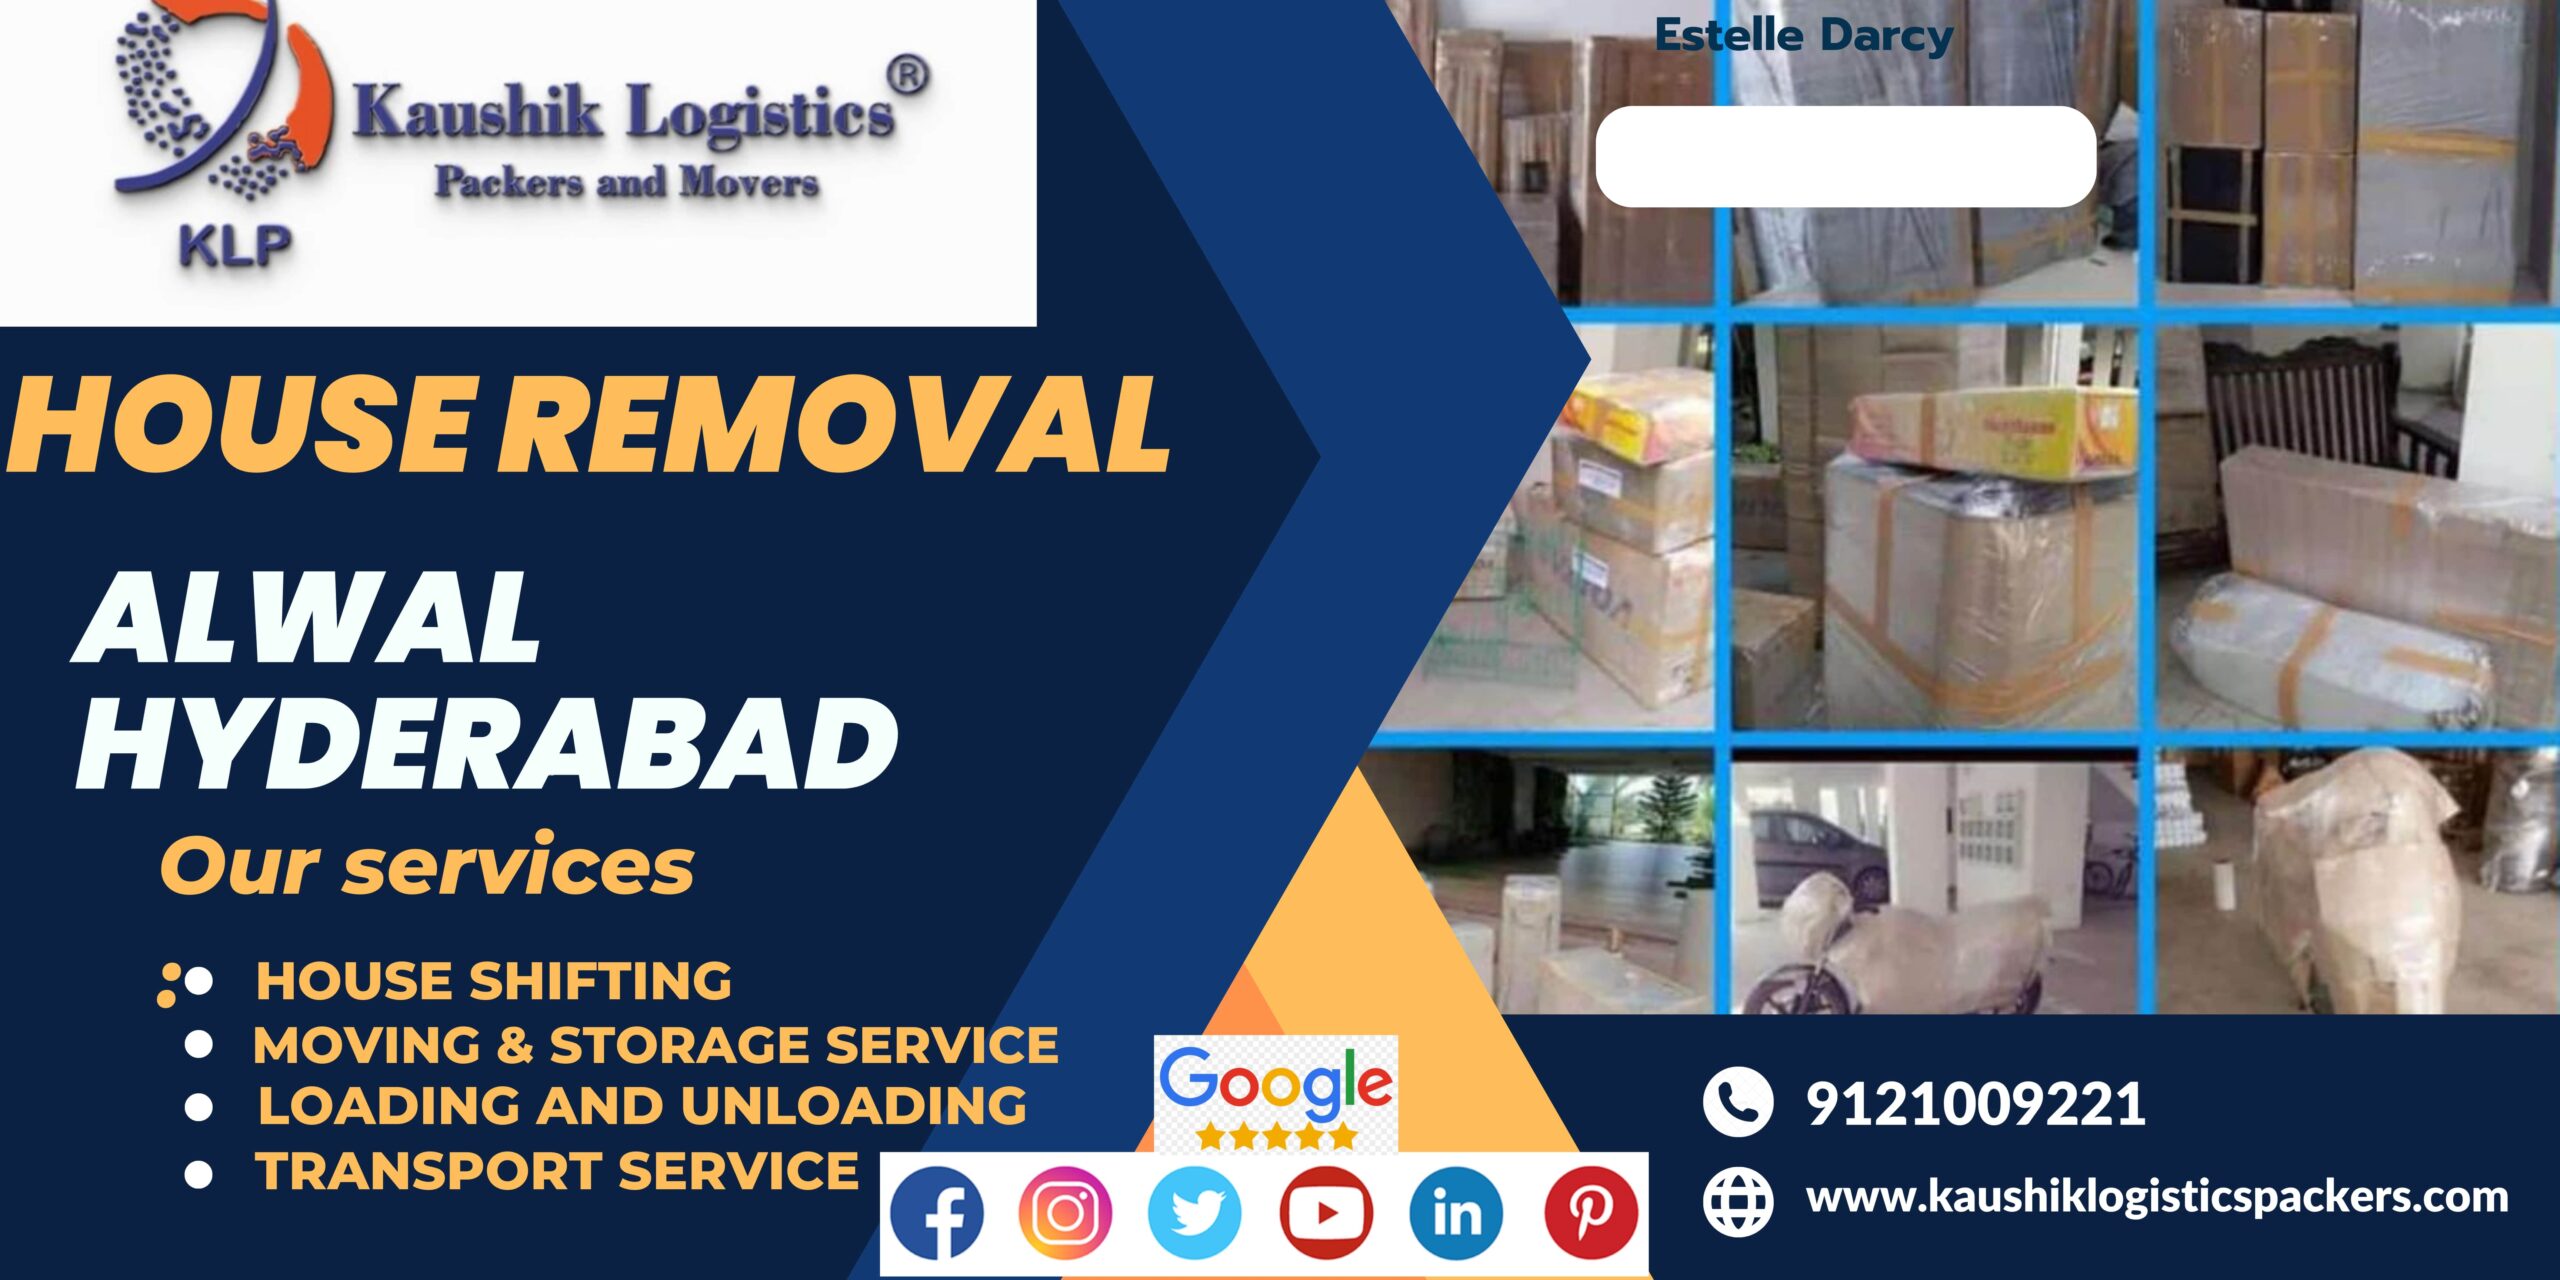 Packers and Movers In Alwal